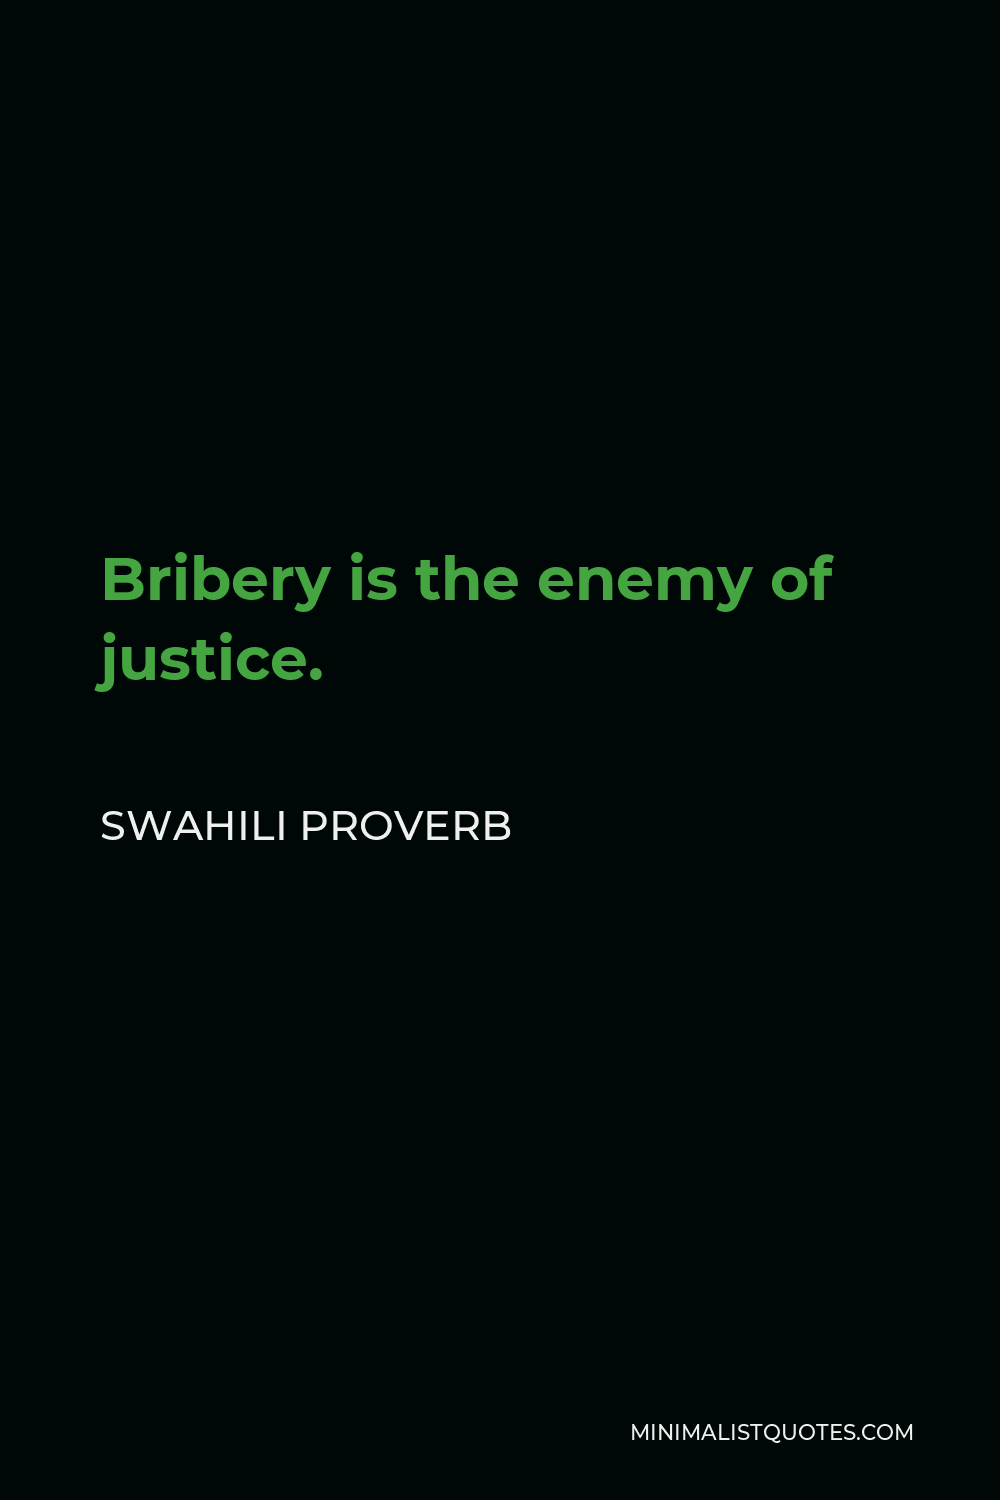 Swahili Proverb Quote - Bribery is the enemy of justice.